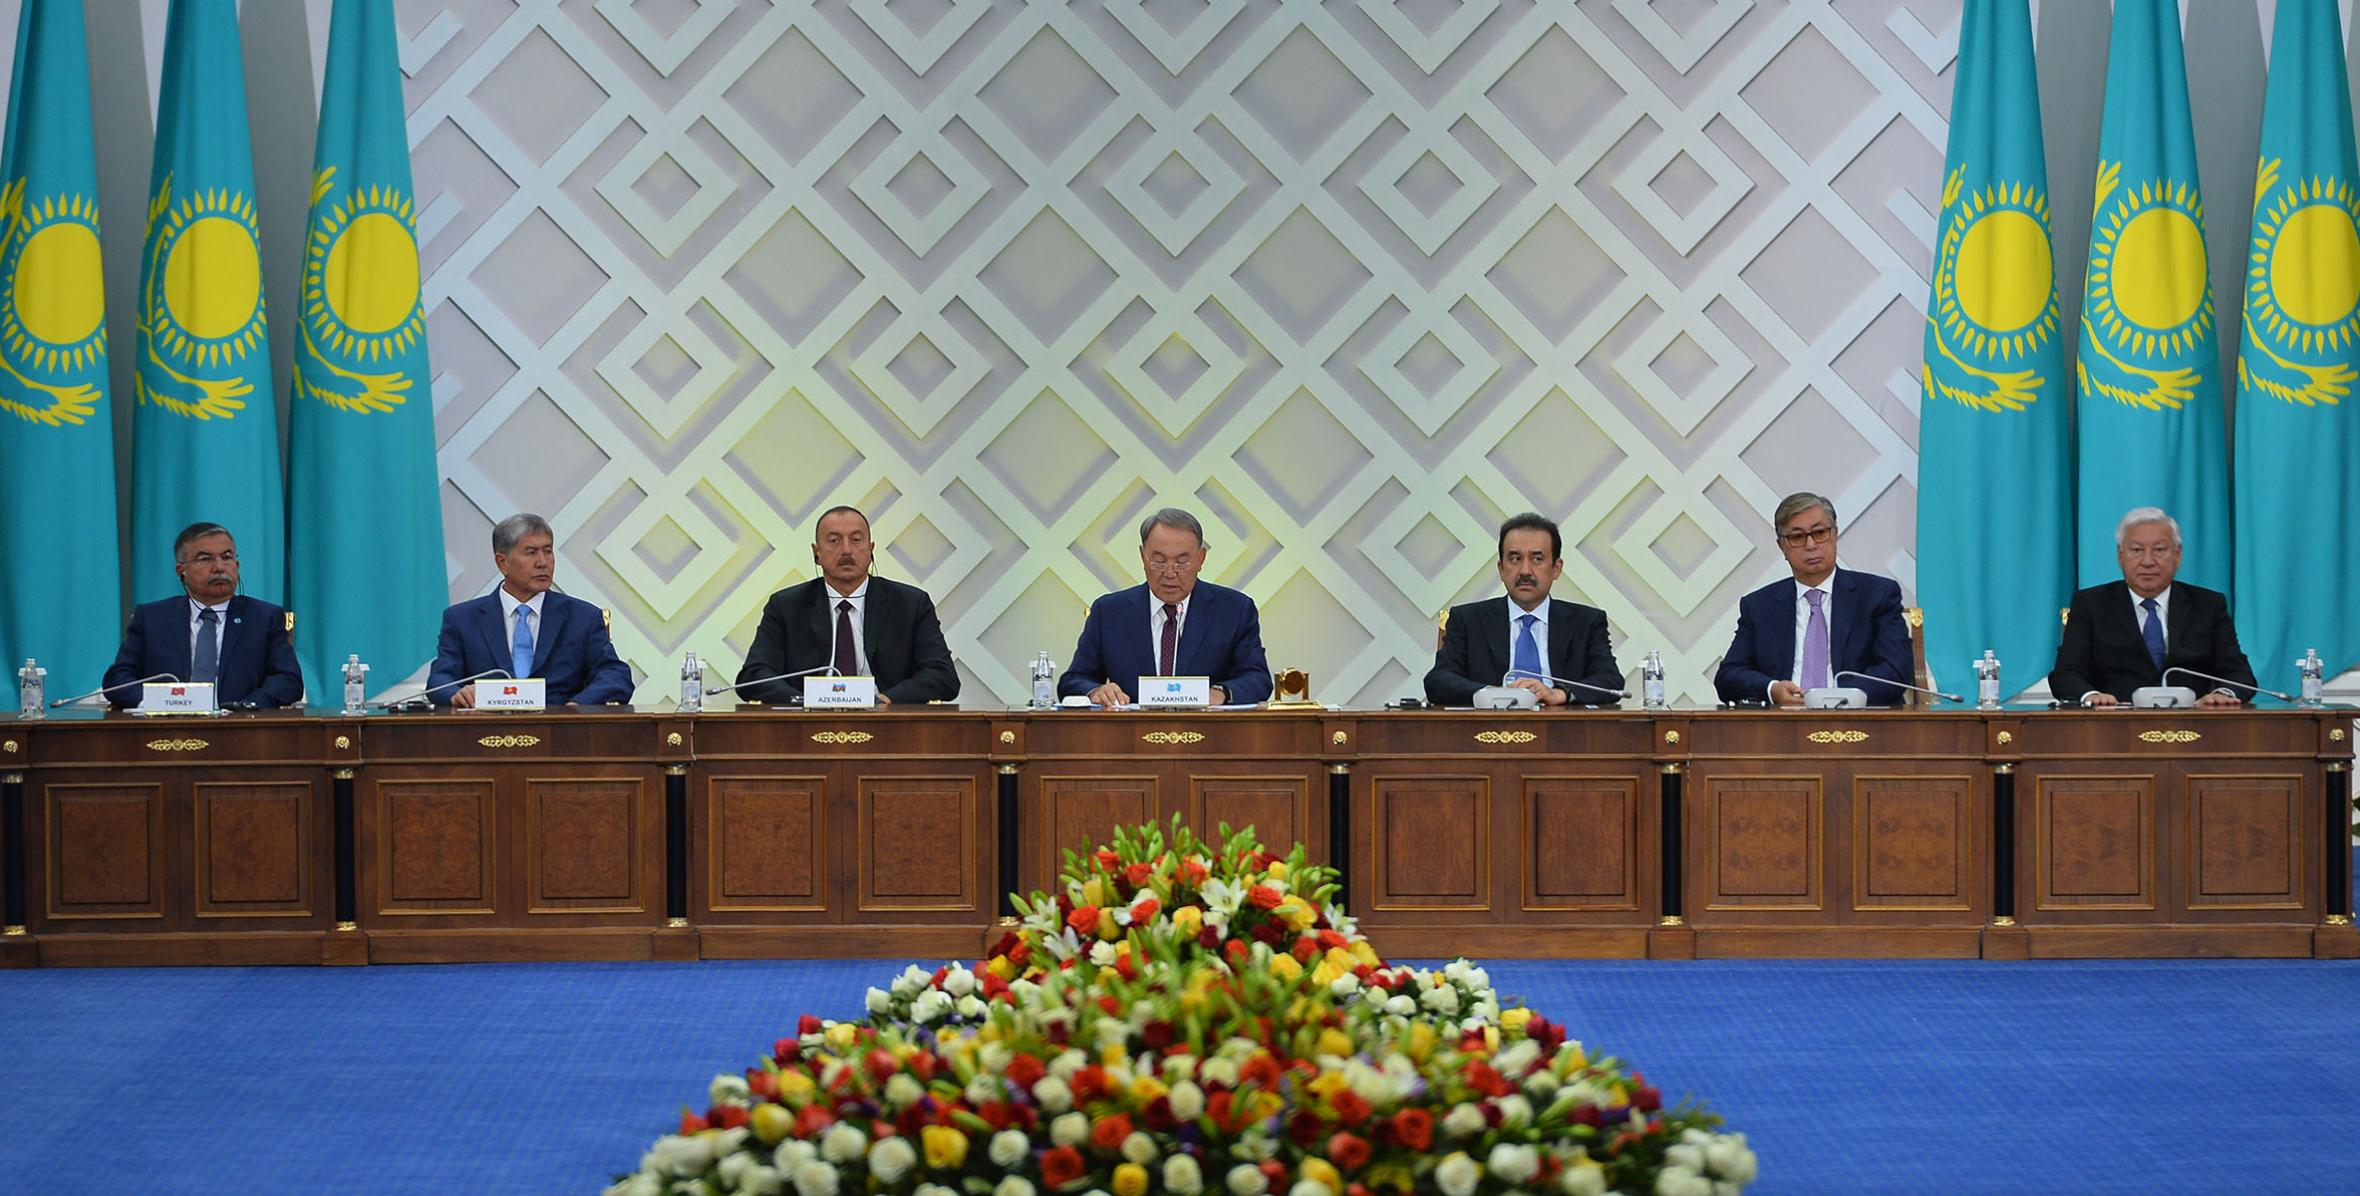 Ilham Aliyev attended a ceremony marking the 550th anniversary of Kazakh Khanate